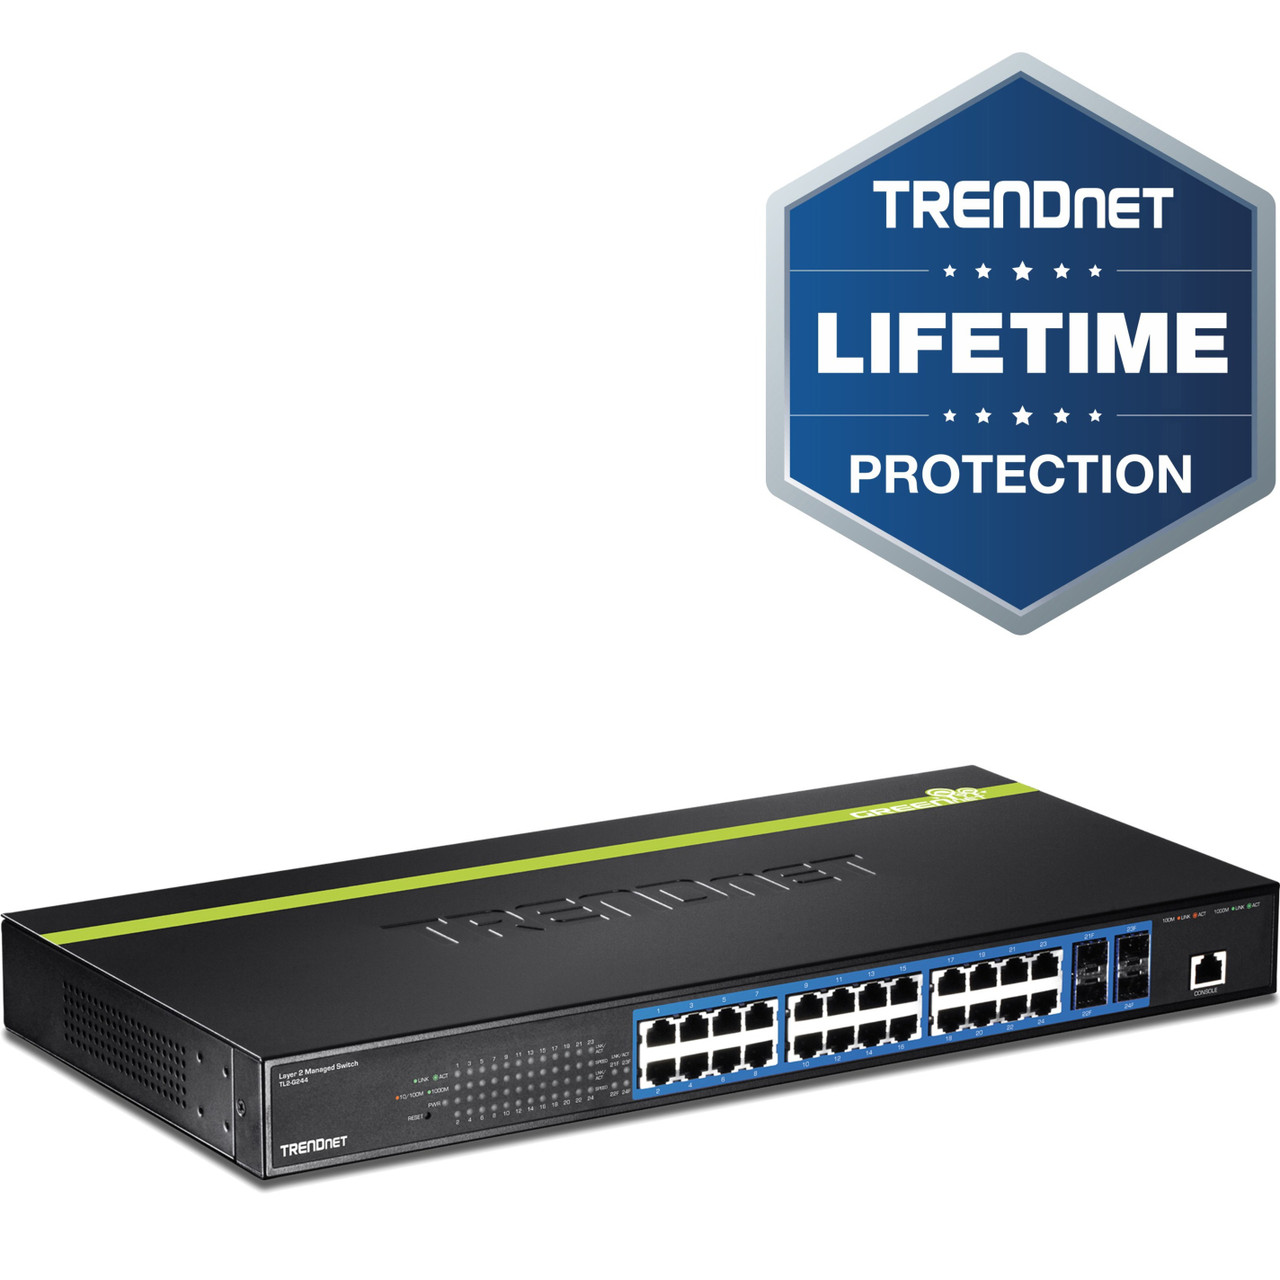 TRENDnet 24-Port Gigabit Layer 2 Switch with 4 Shared Mini-GBIC Slots; 48 Gbps Switching Capacity; SNMP; Lifetime Protection; TL2-G244